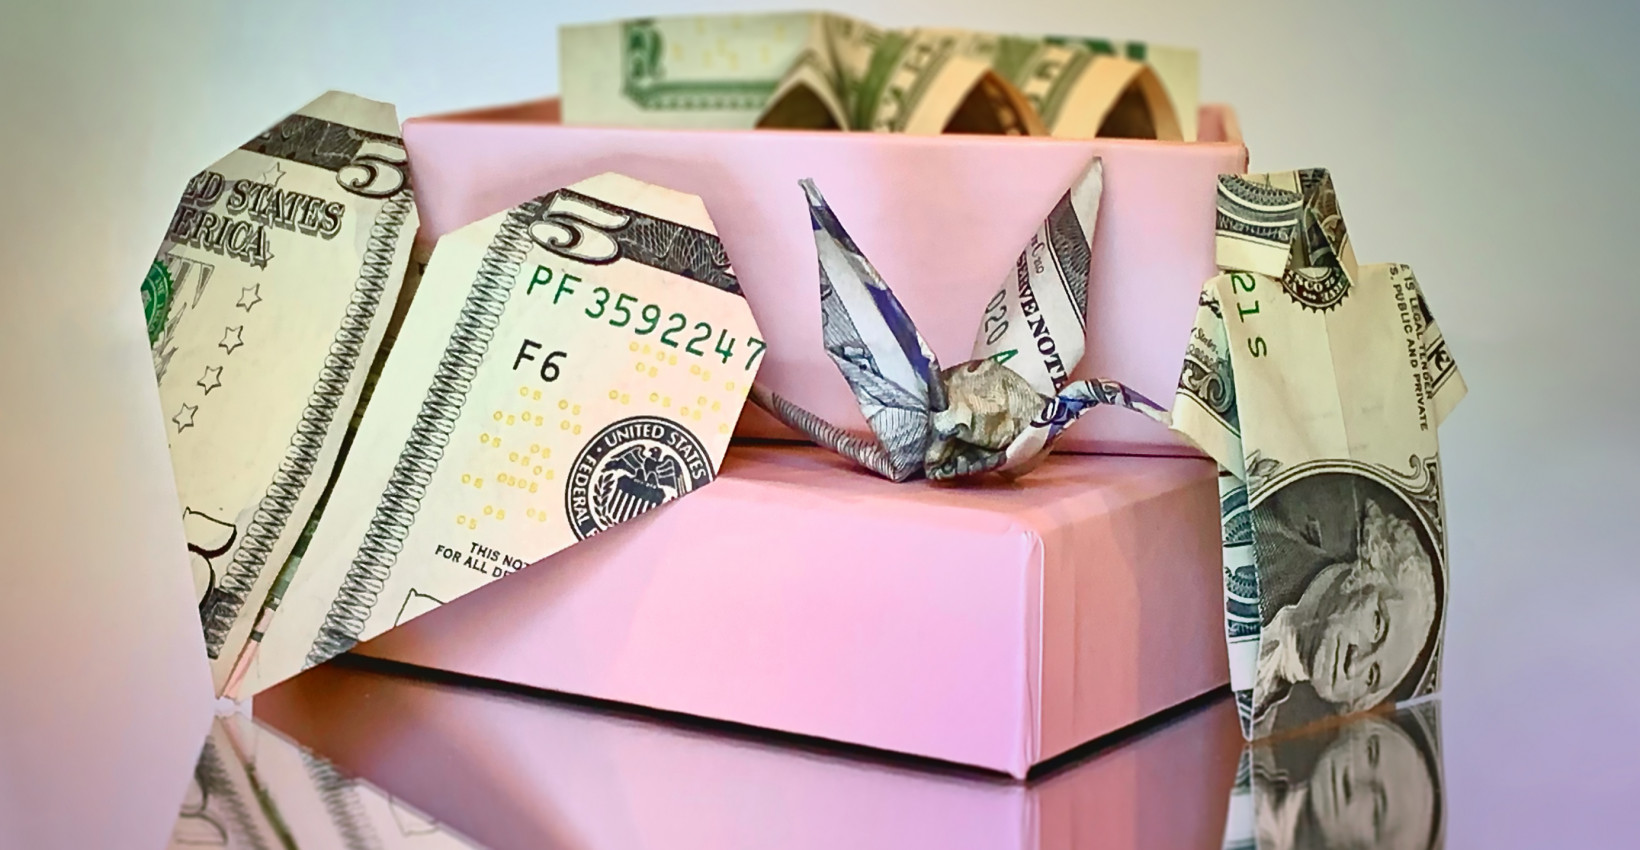 A paper origami swan made out of cash